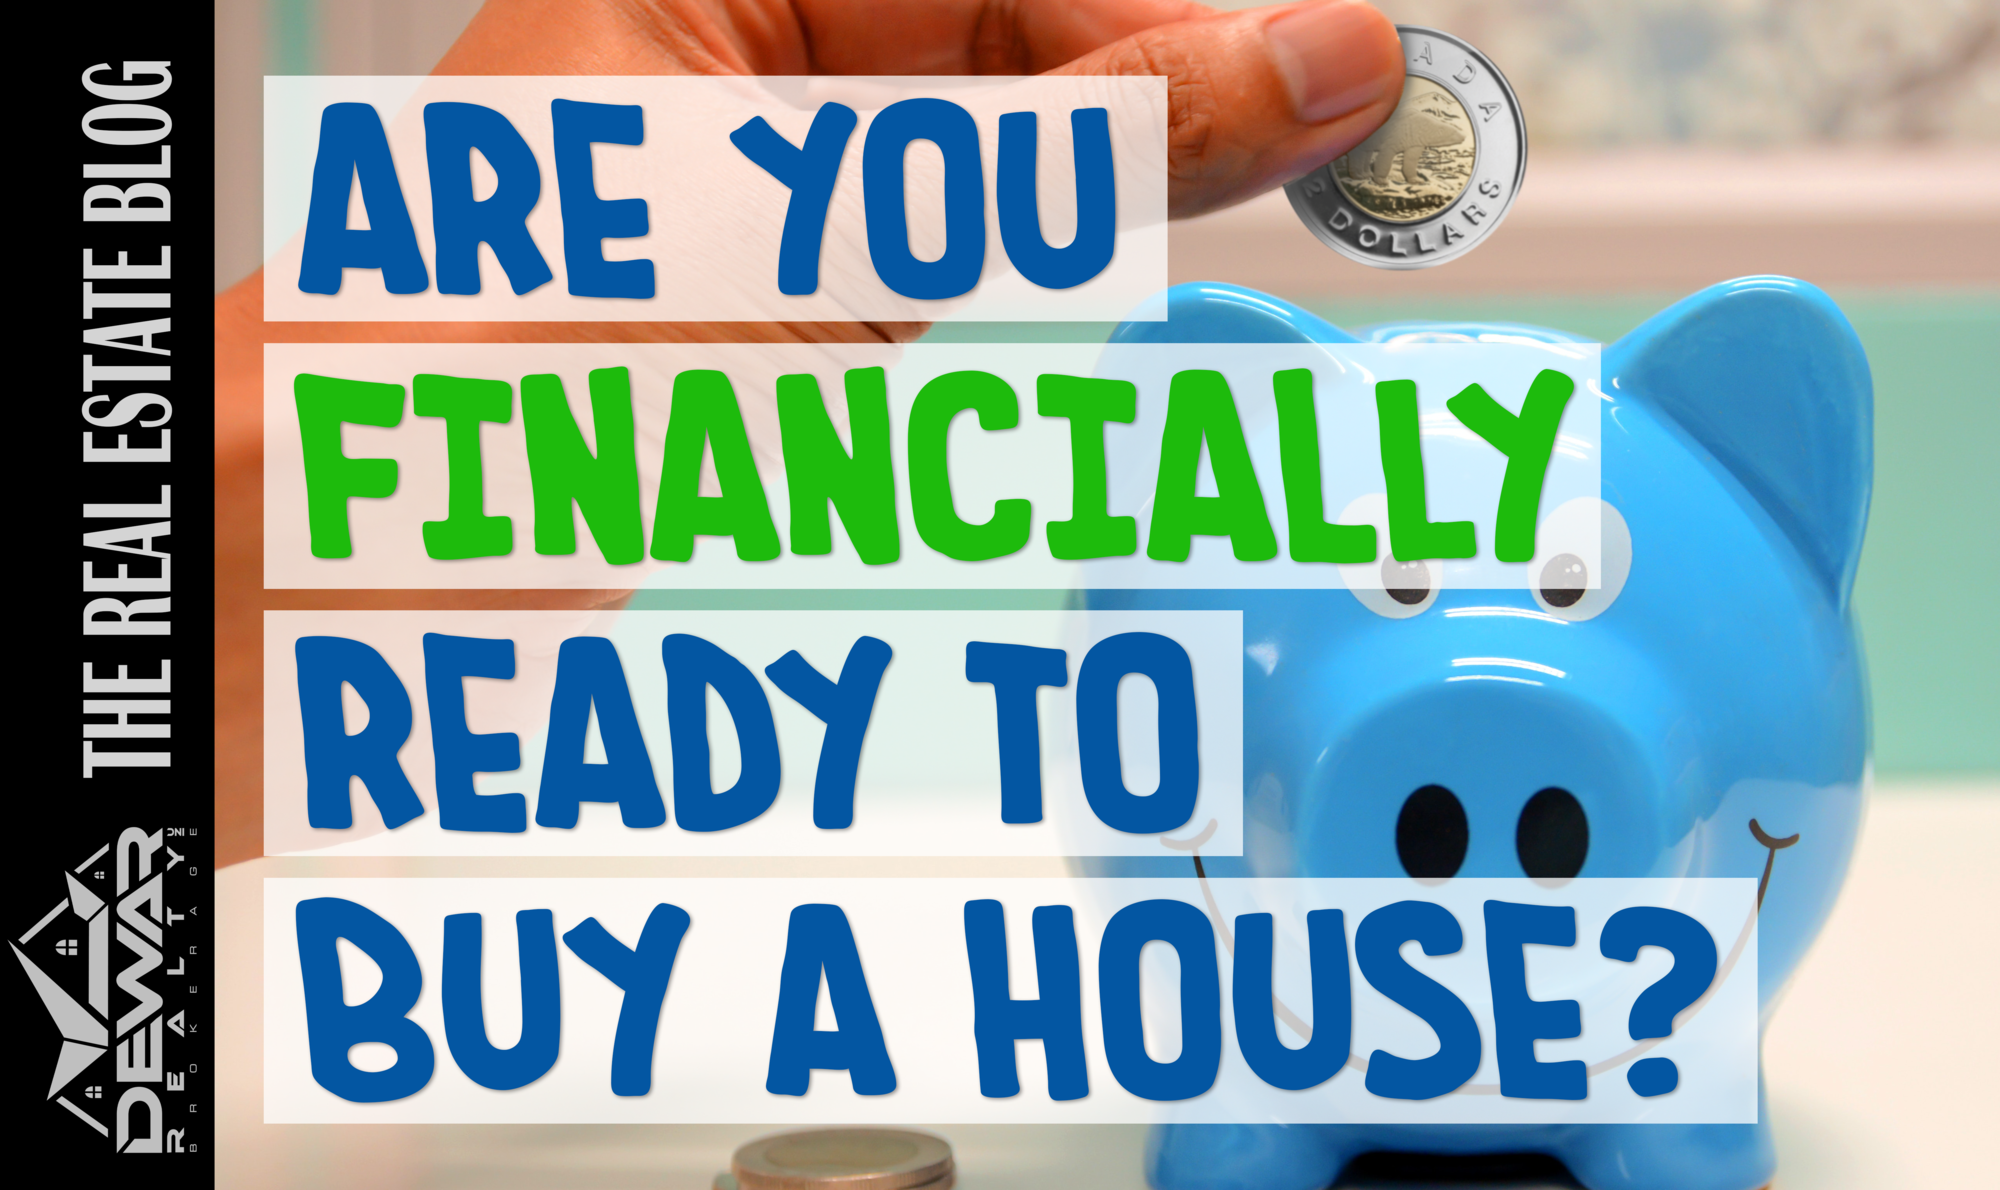 Are you financially ready to buy a house? | The Real Estate Blog | Dewar Realty Inc